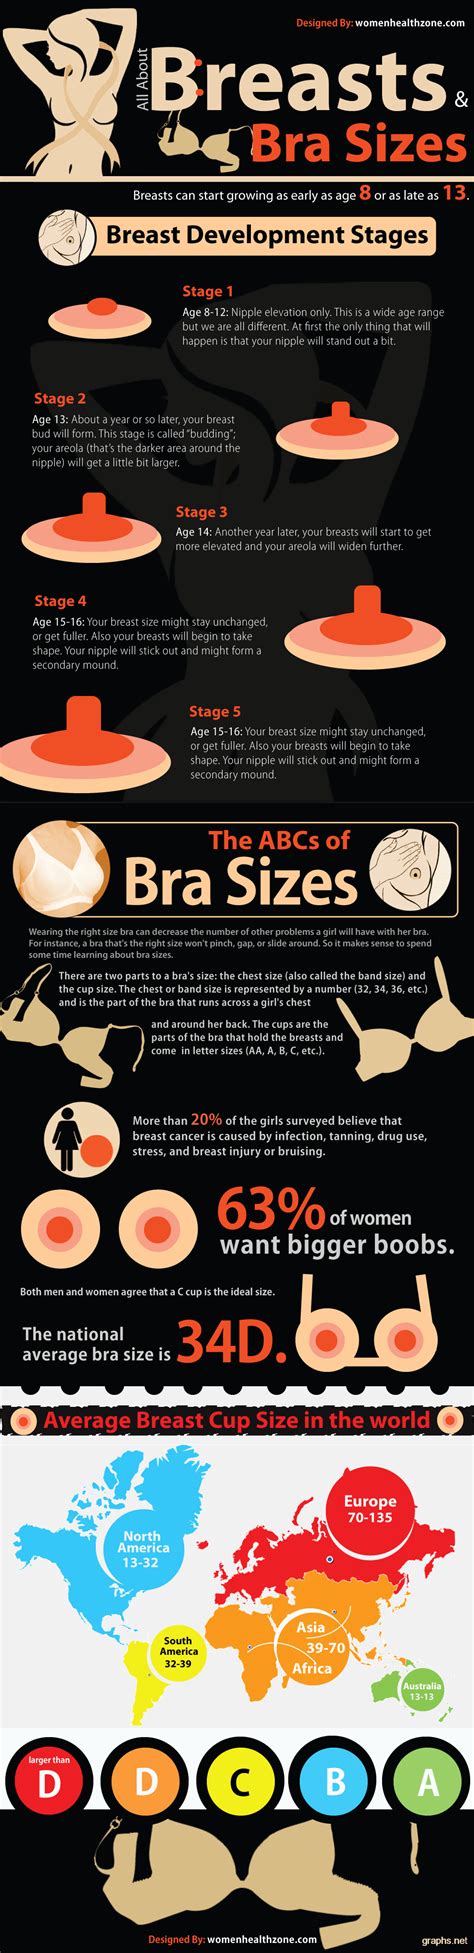 Bra Size Chart With Pictures Bra Size Chart Does Your Bra Fit How To Instructions Stand